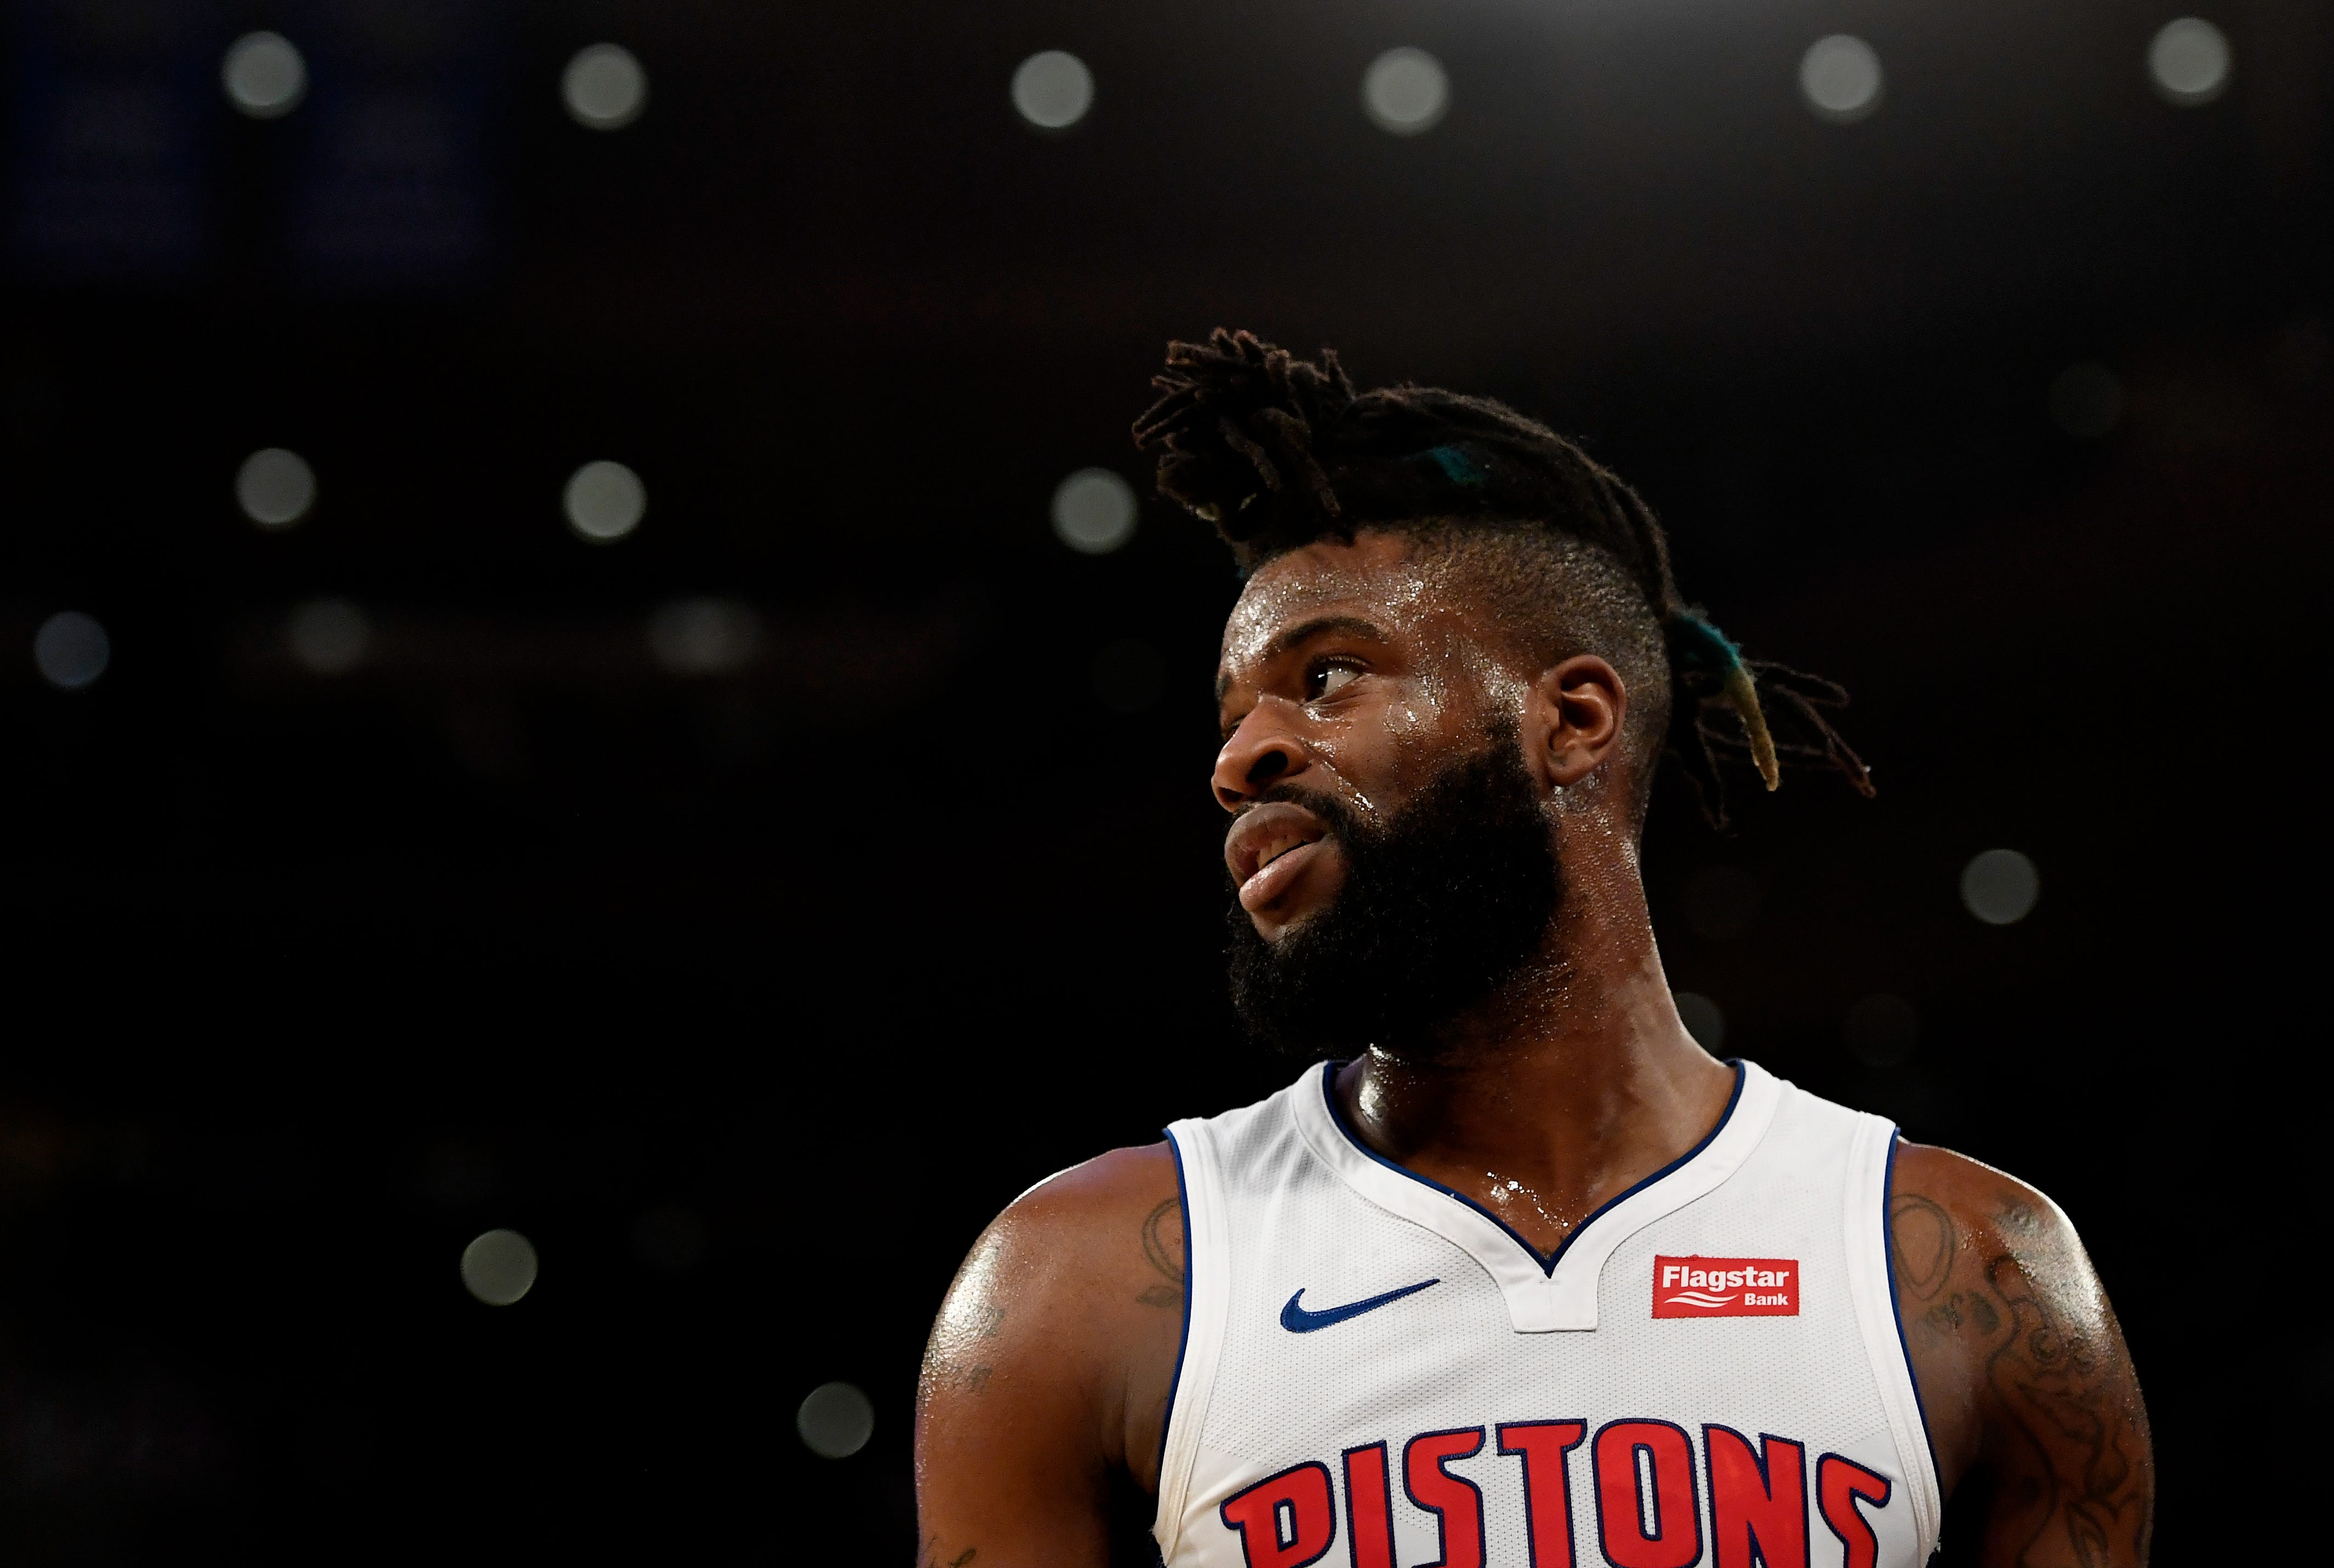 Reggie Bullock played his last game with the Pistons on Tuesday night.